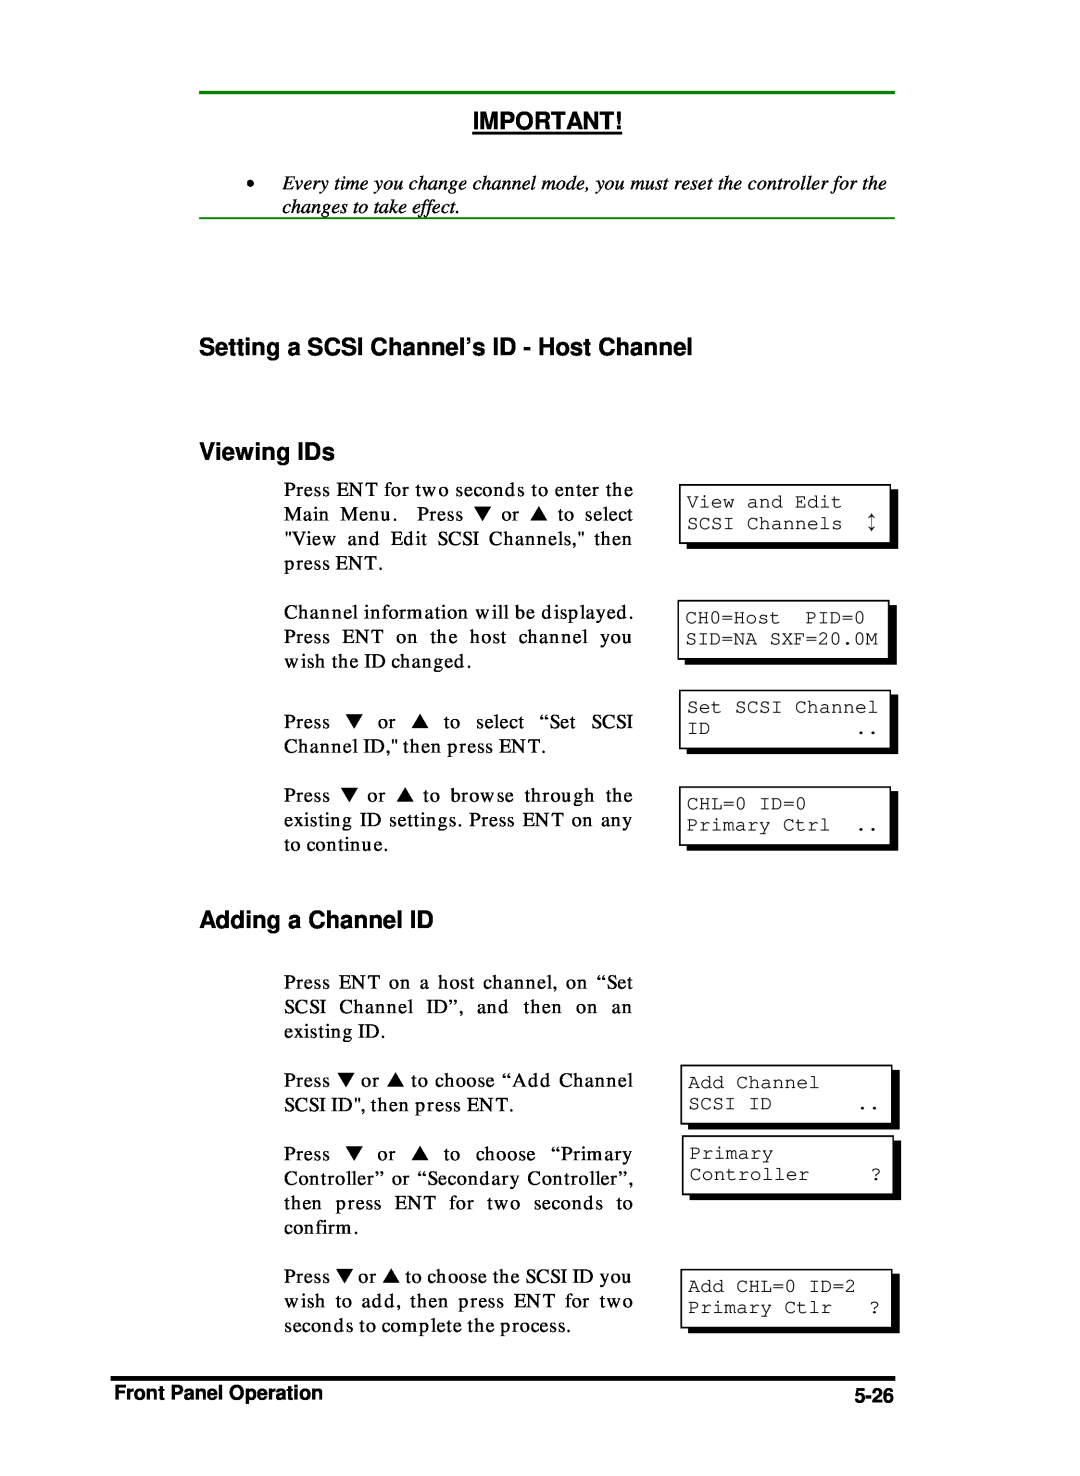 Compaq Infortrend manual Setting a SCSI Channel’s ID - Host Channel, Viewing IDs, Adding a Channel ID 